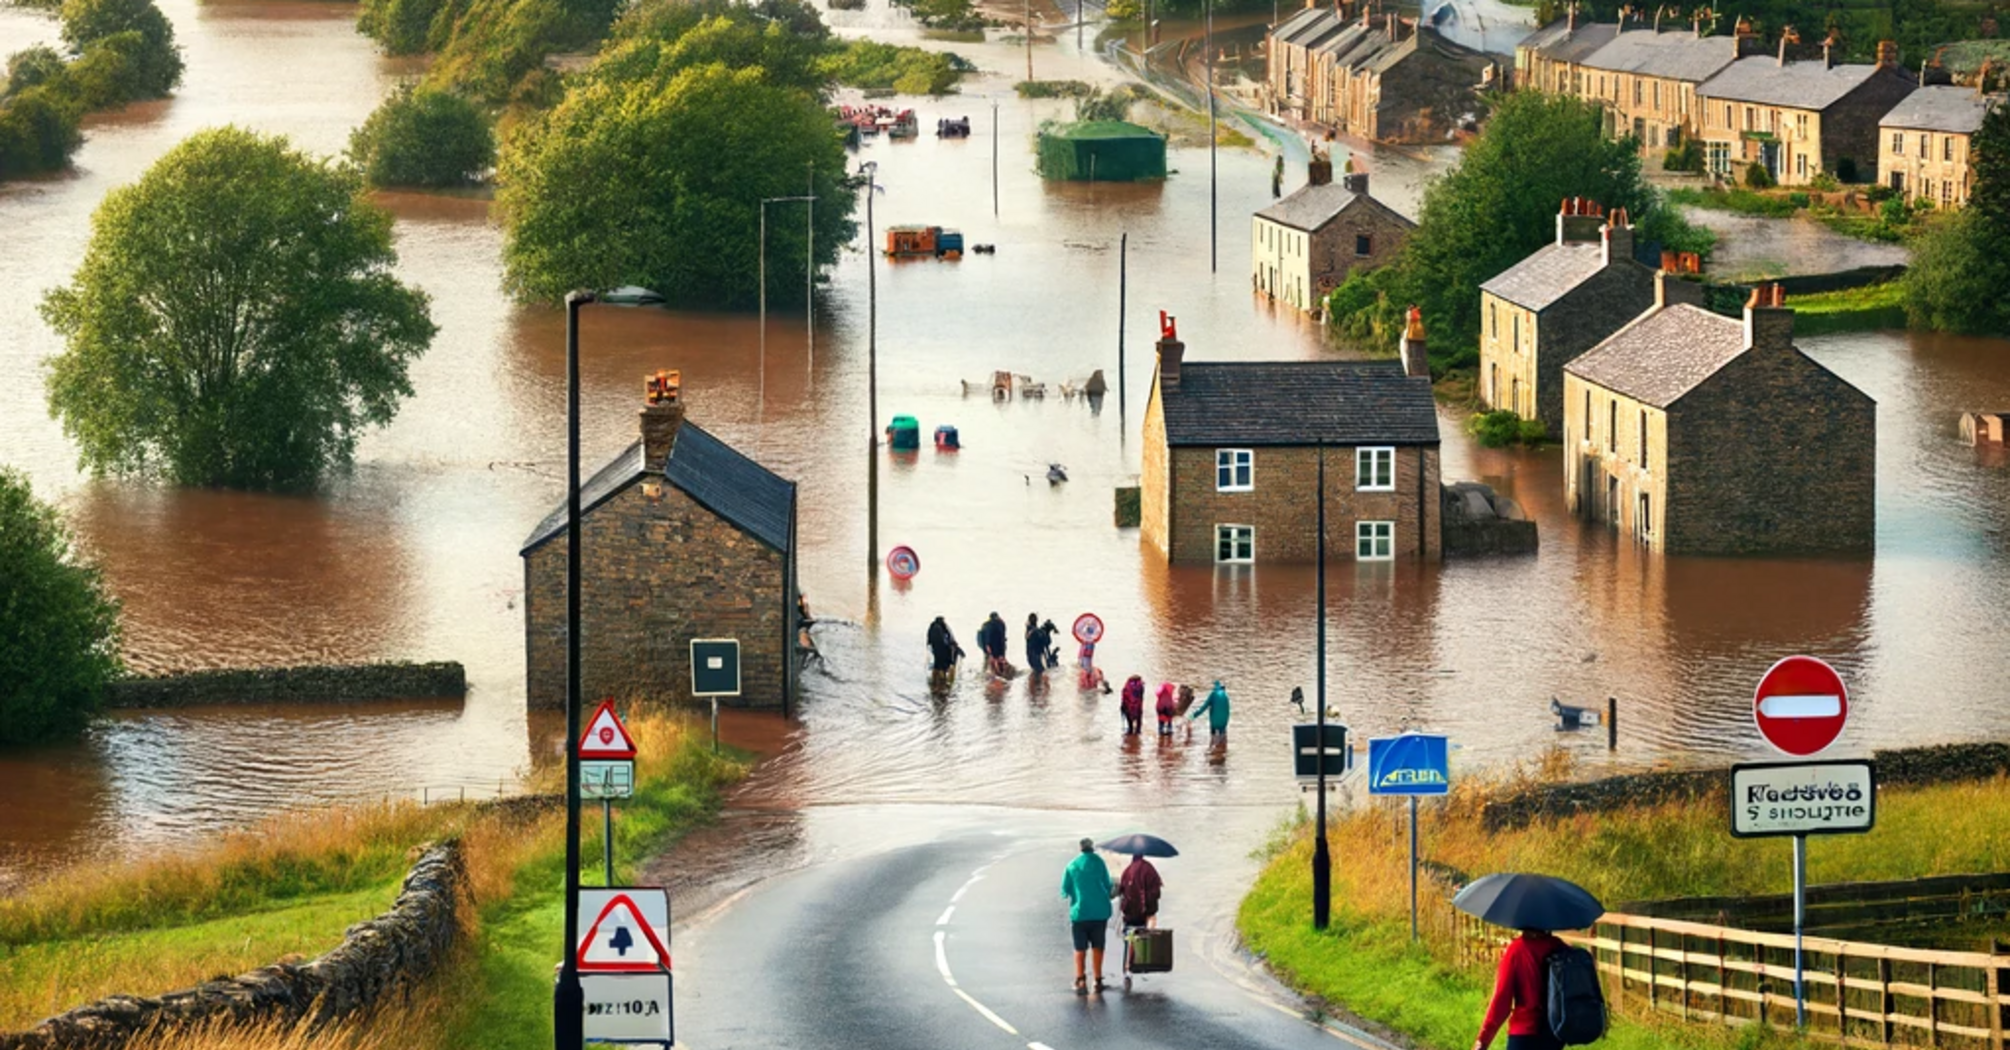 Flooded countryside in Northern England with tourists navigating submerged roads